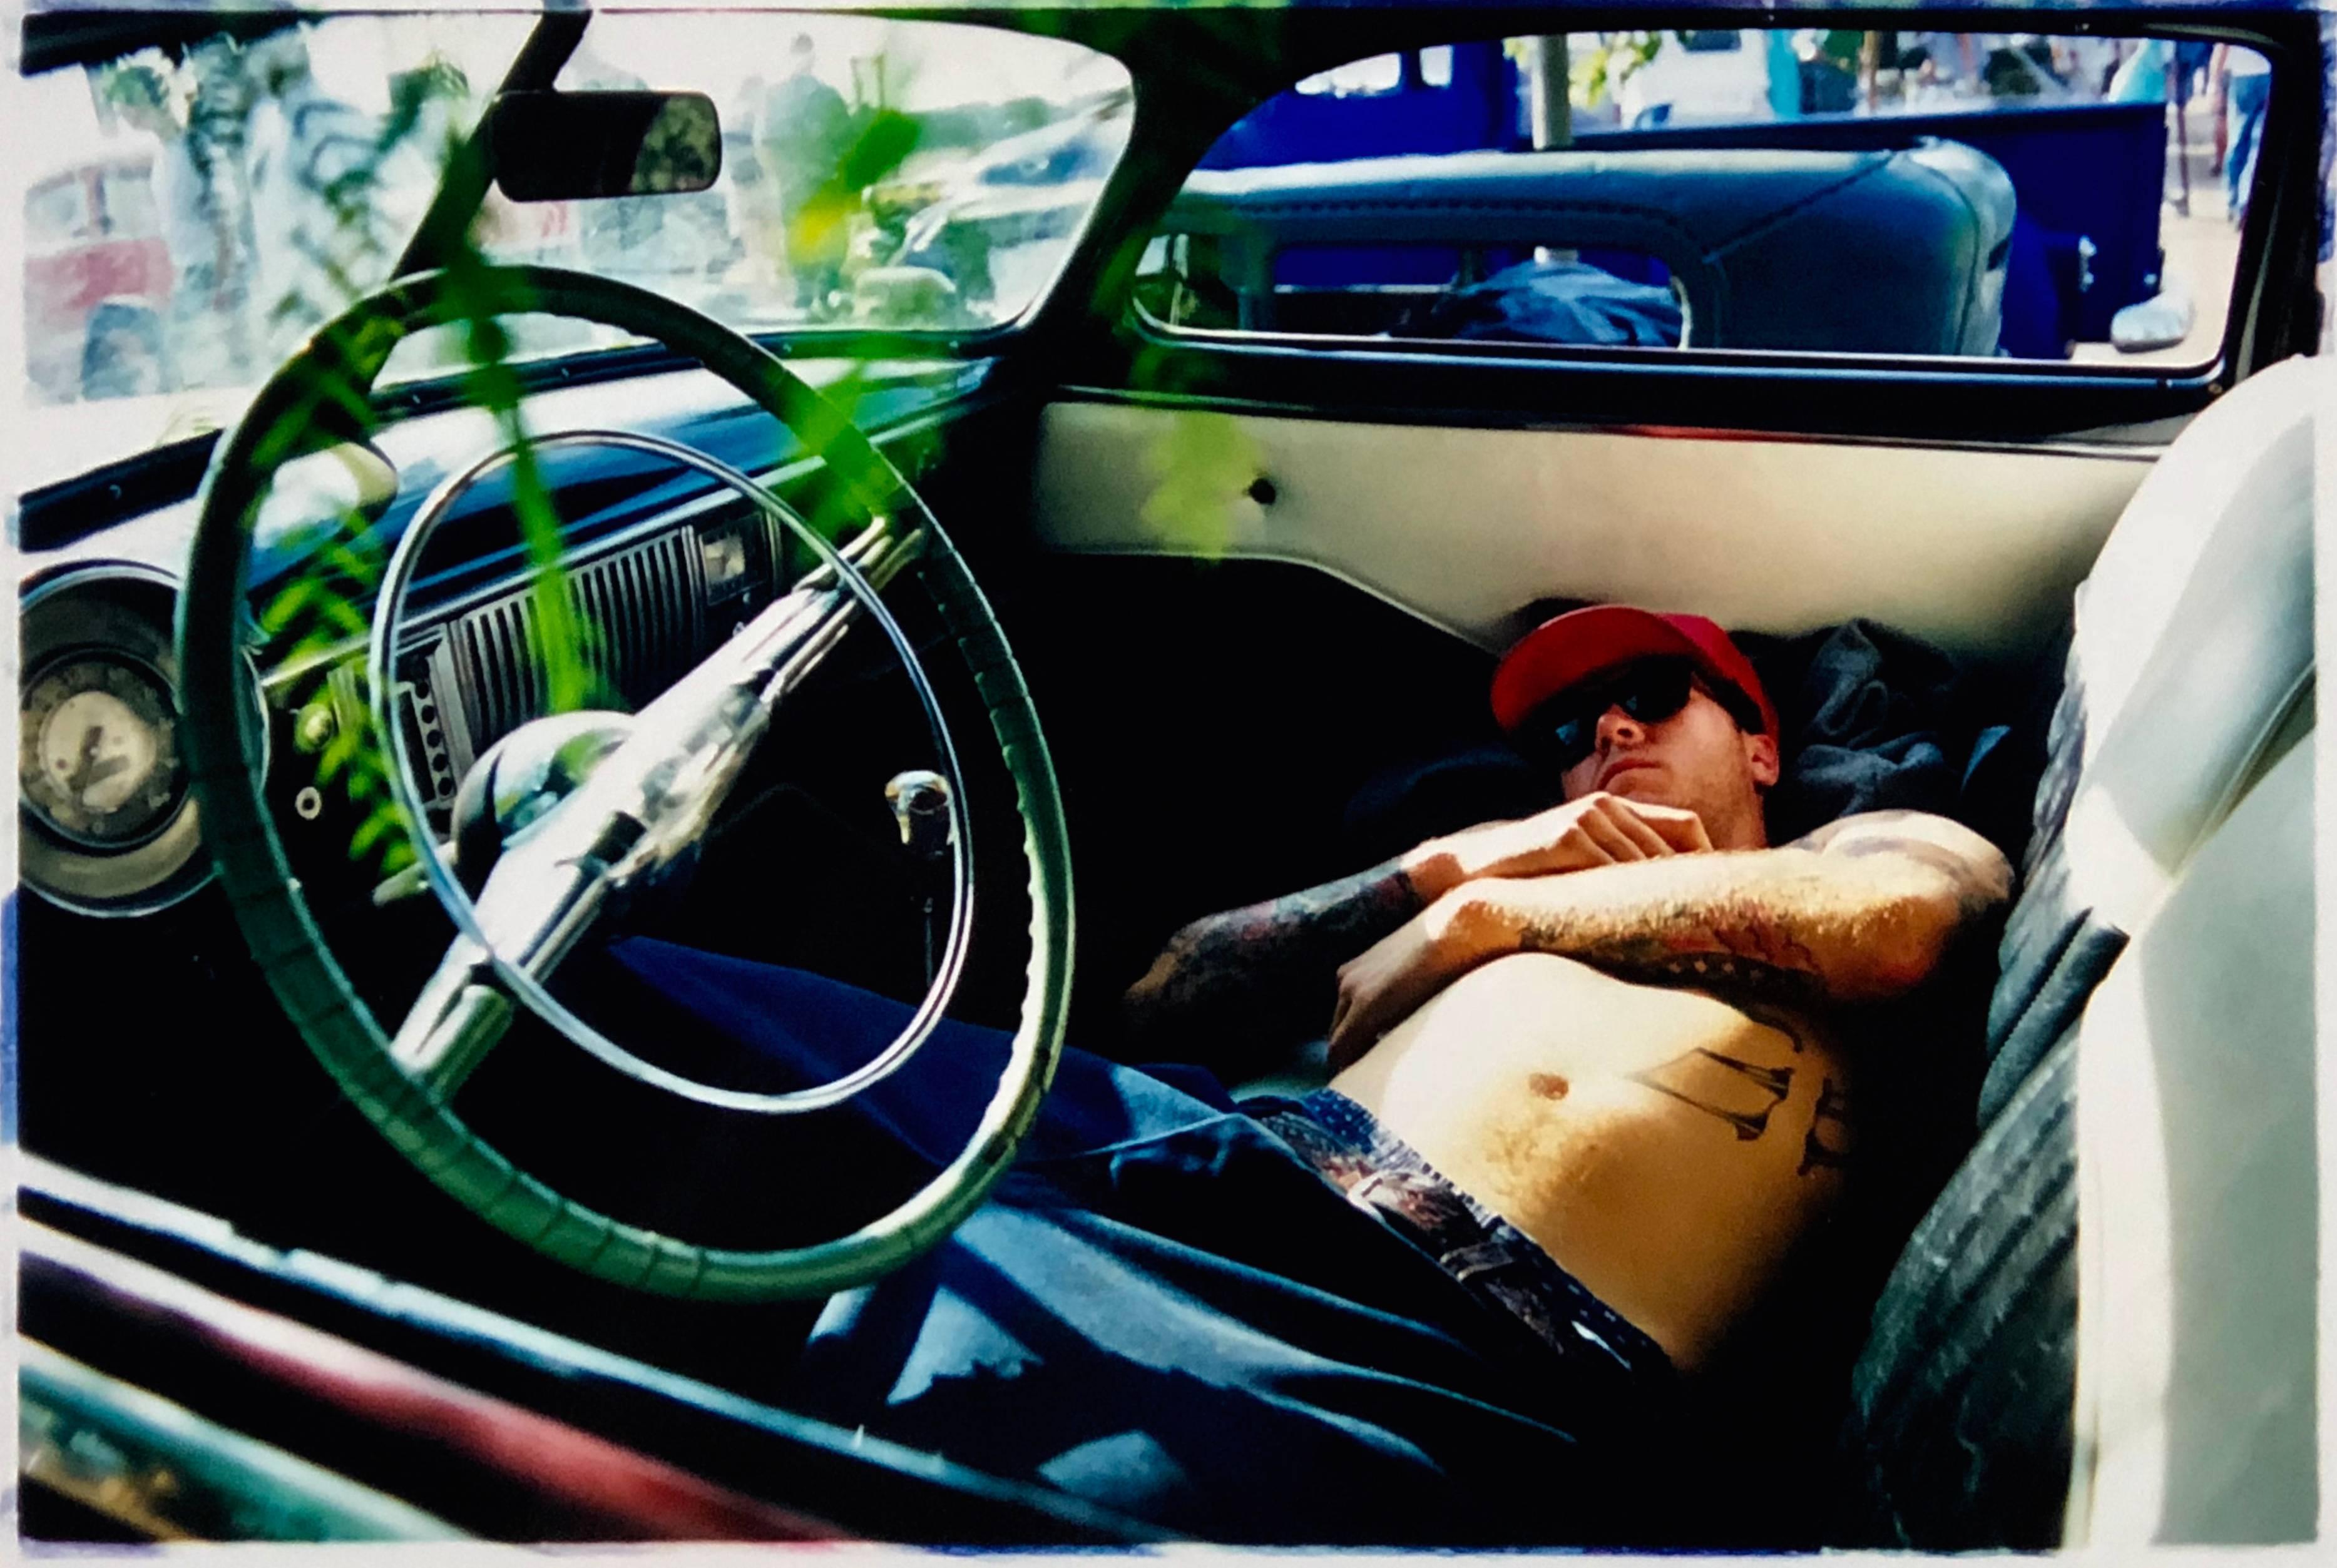 Resting Hot Rod, Bakersfield, California - Contemporary color photography